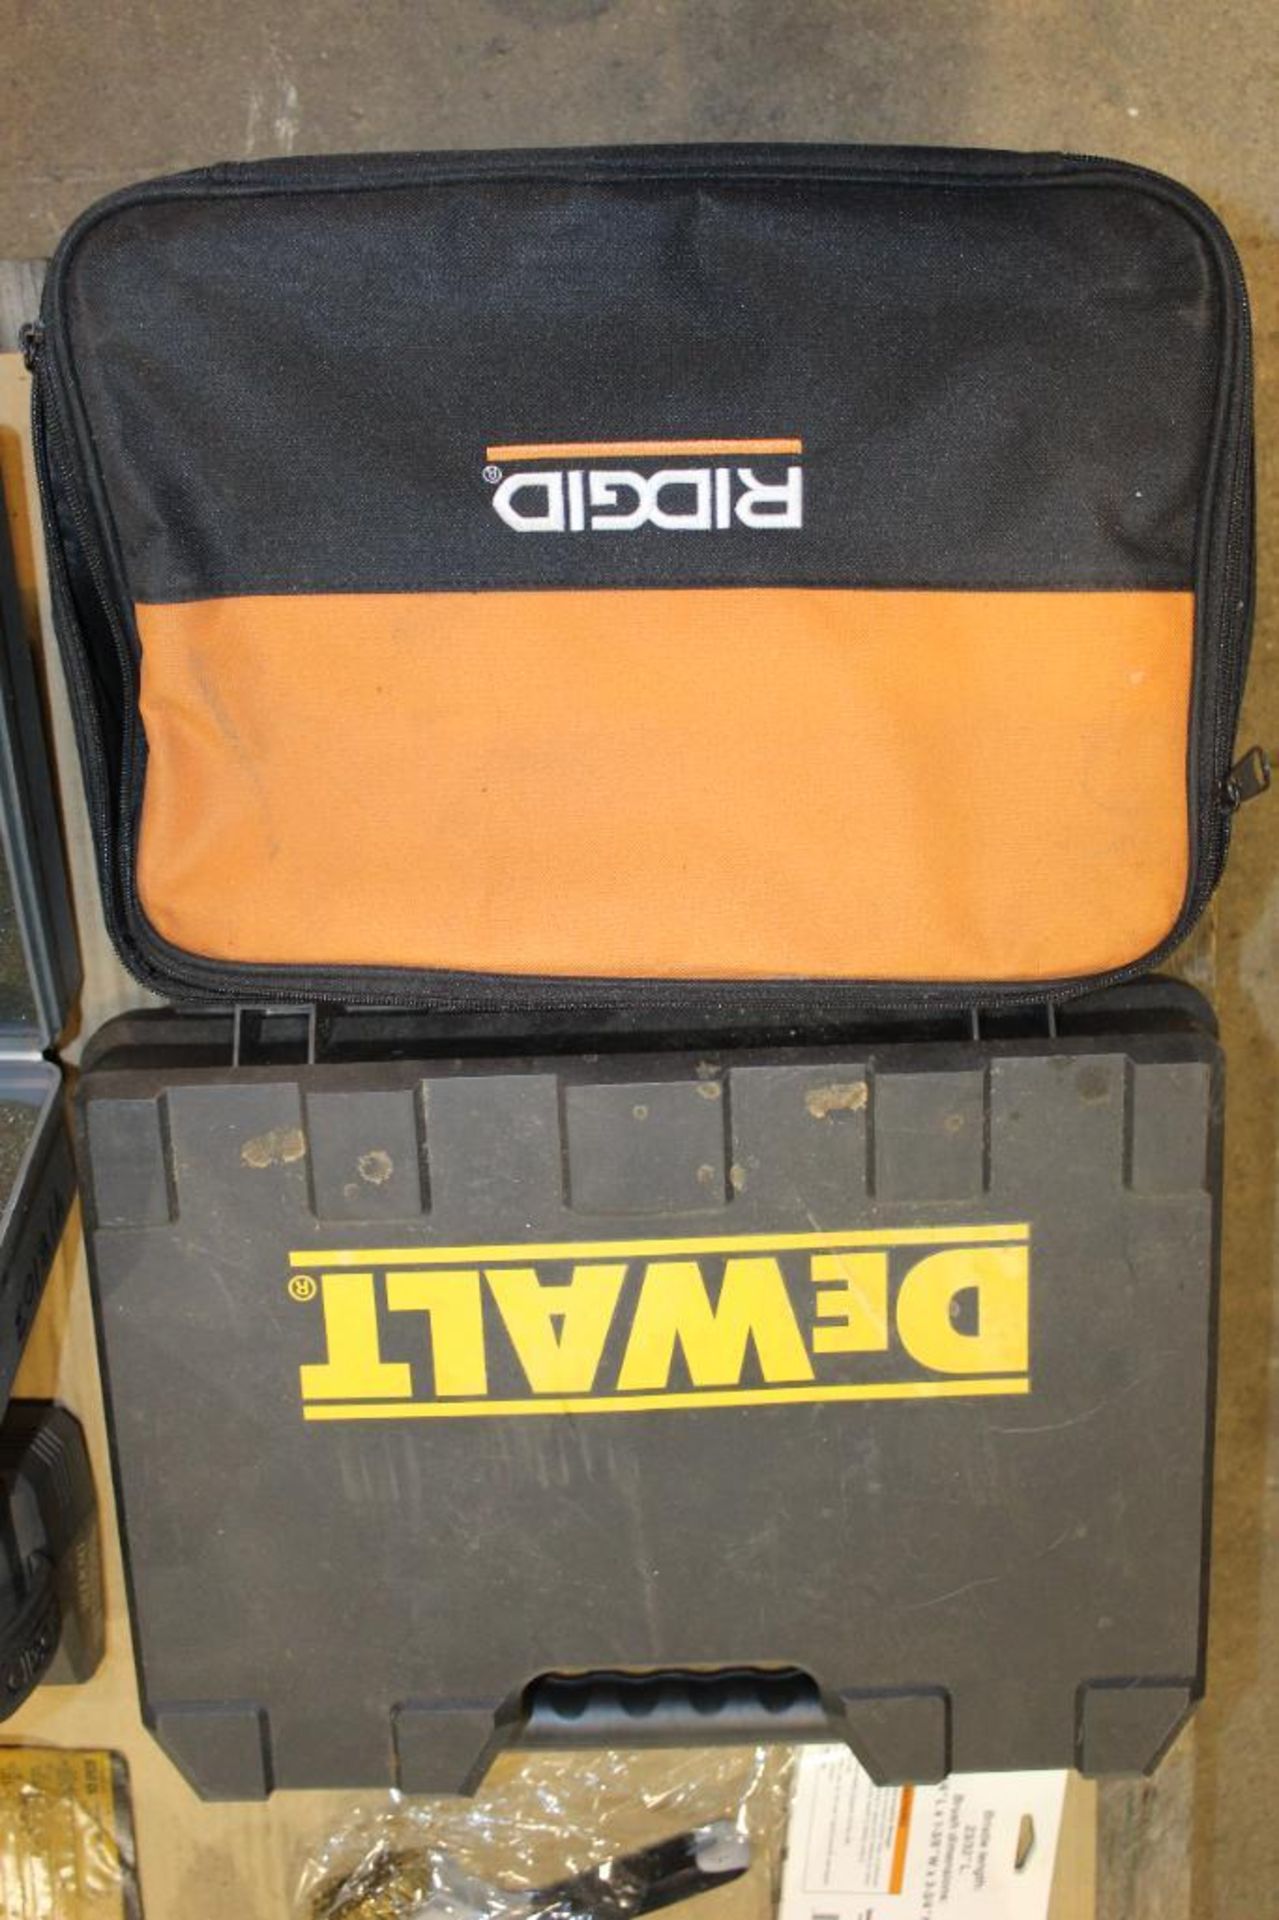 Lot of Ridgid Canvas Bags/Assorted Tool Holders, DeWalt Hardcase with (2) Battery Chargers, Ridgid A - Image 10 of 13